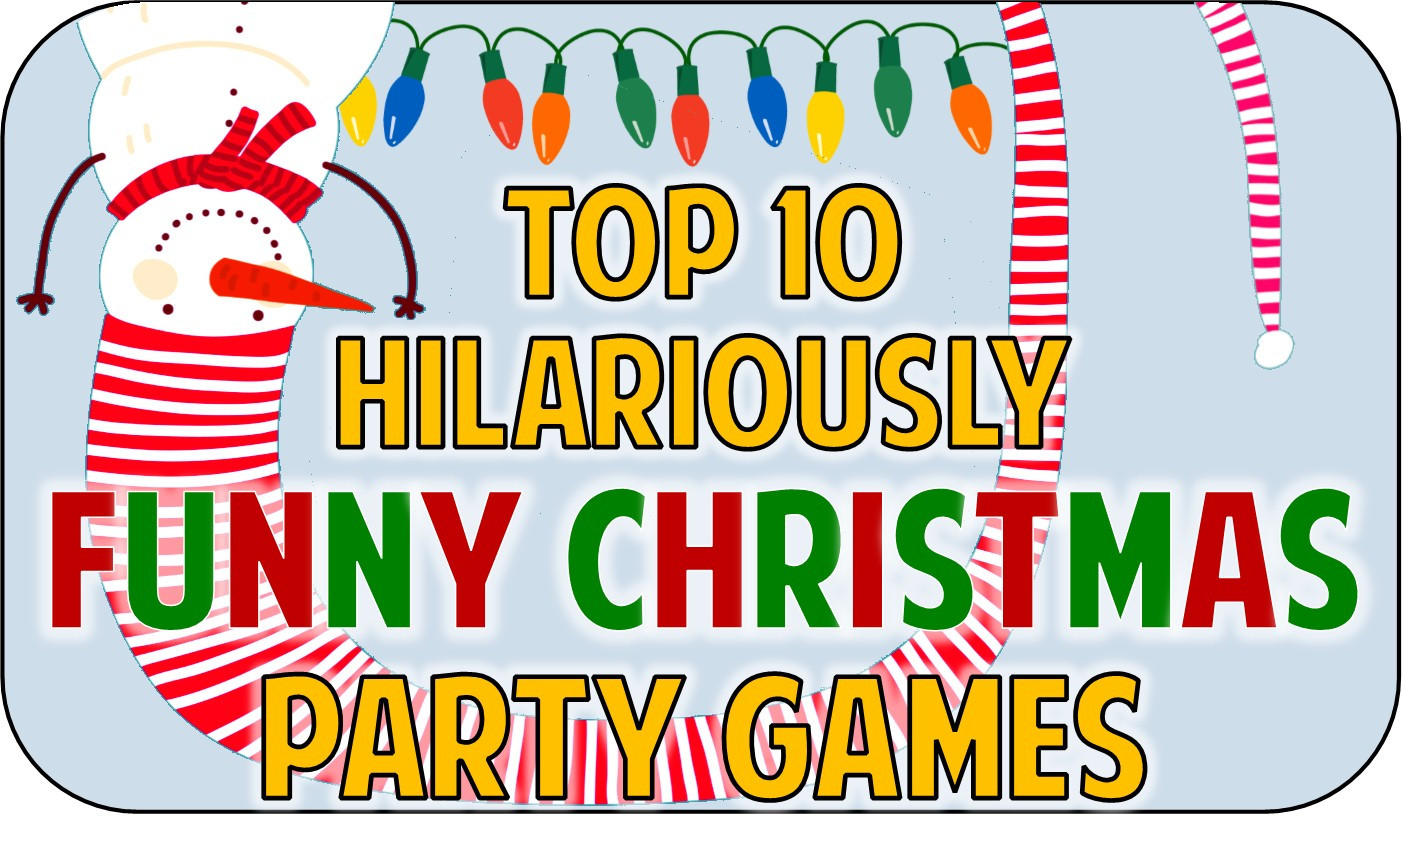 Enjoyable Office Christmas Party Games Ideas
 Christmas Party fice Games